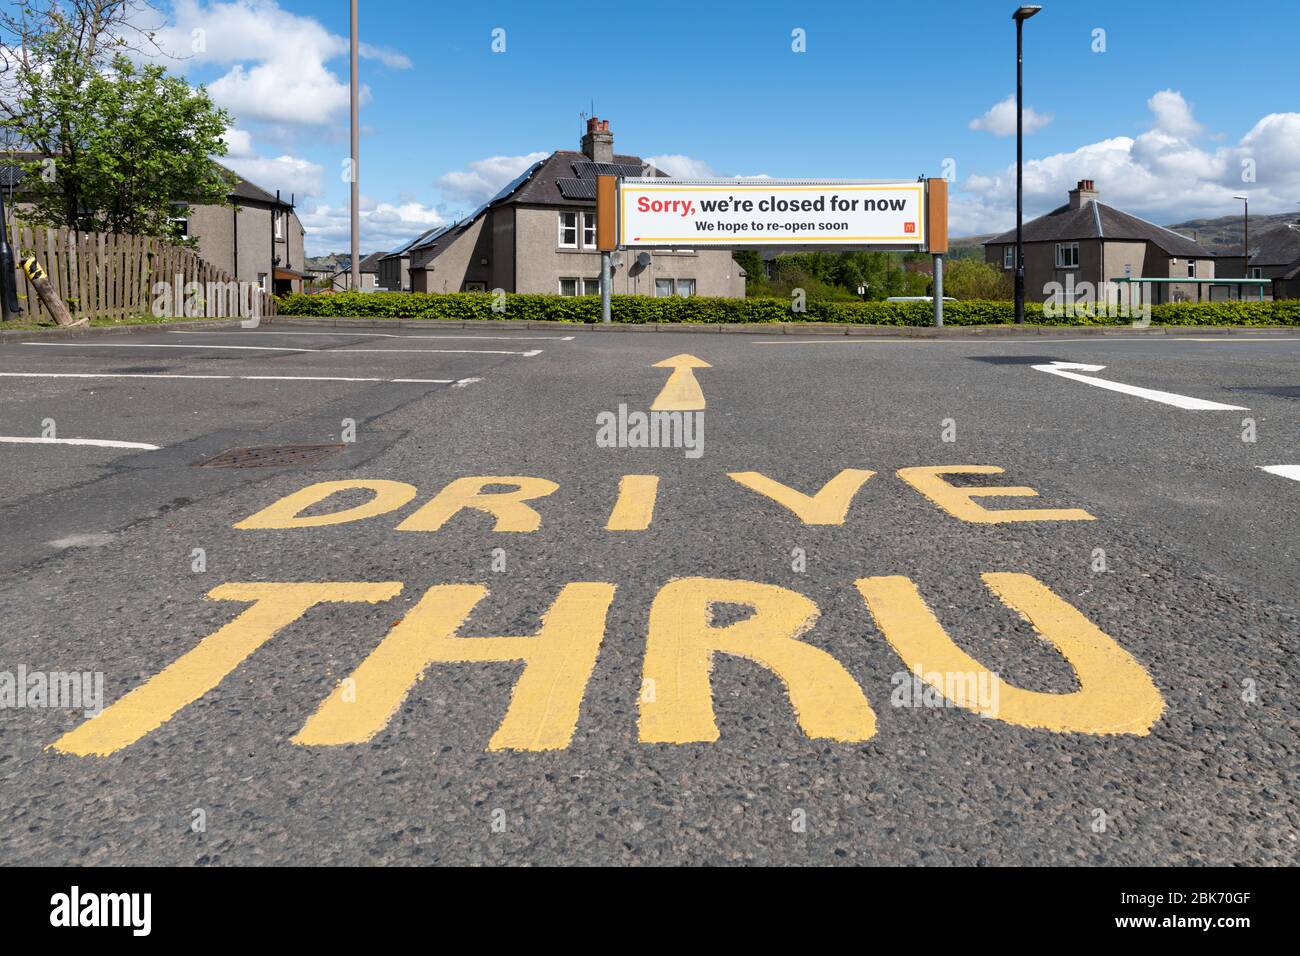 McDonalds drive thru - closed during the coronavirus pandemic - 'sorry, we're closed for now. We hope to re-open soon' - Stirling, Scotland, UK Stock Photo